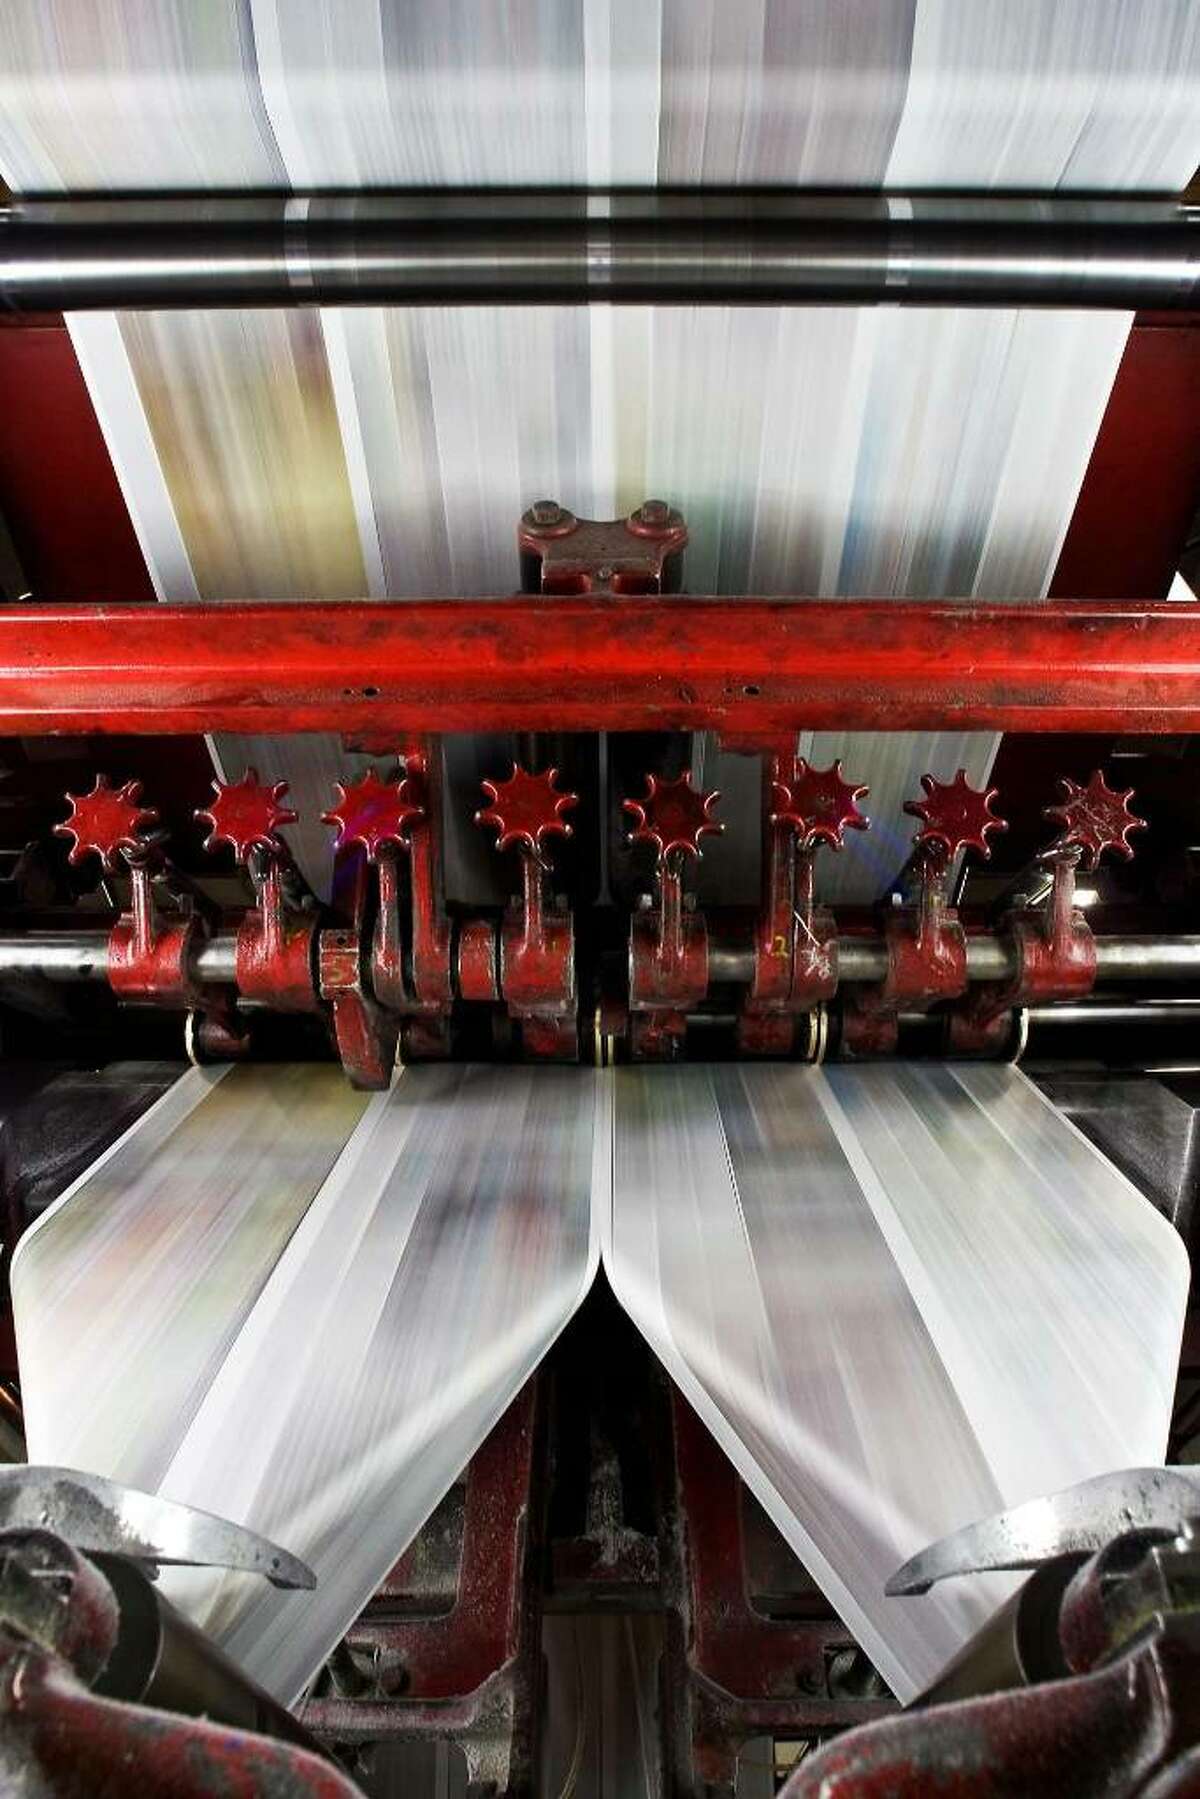 The final run of the press at The News-Times in Danbury on June 13, 2009.